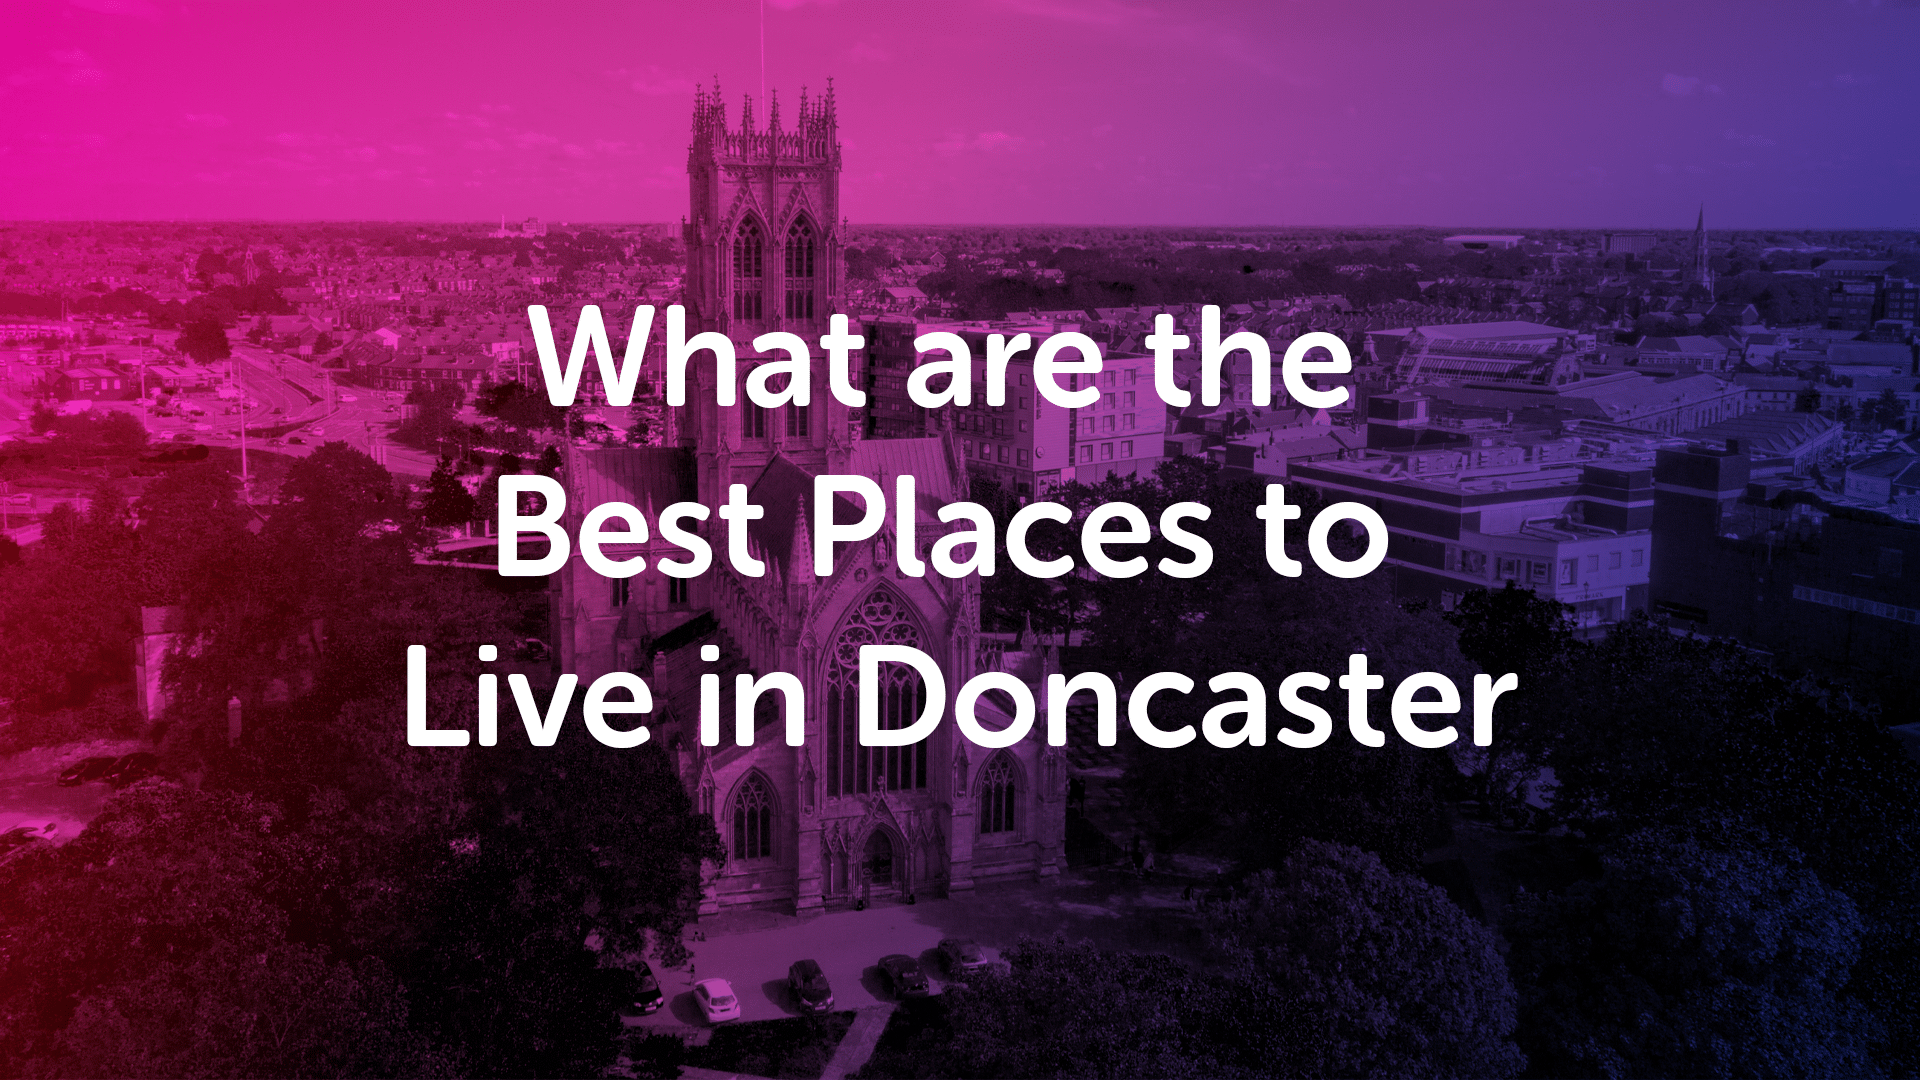 What are the 7 best places to live in Doncaster?